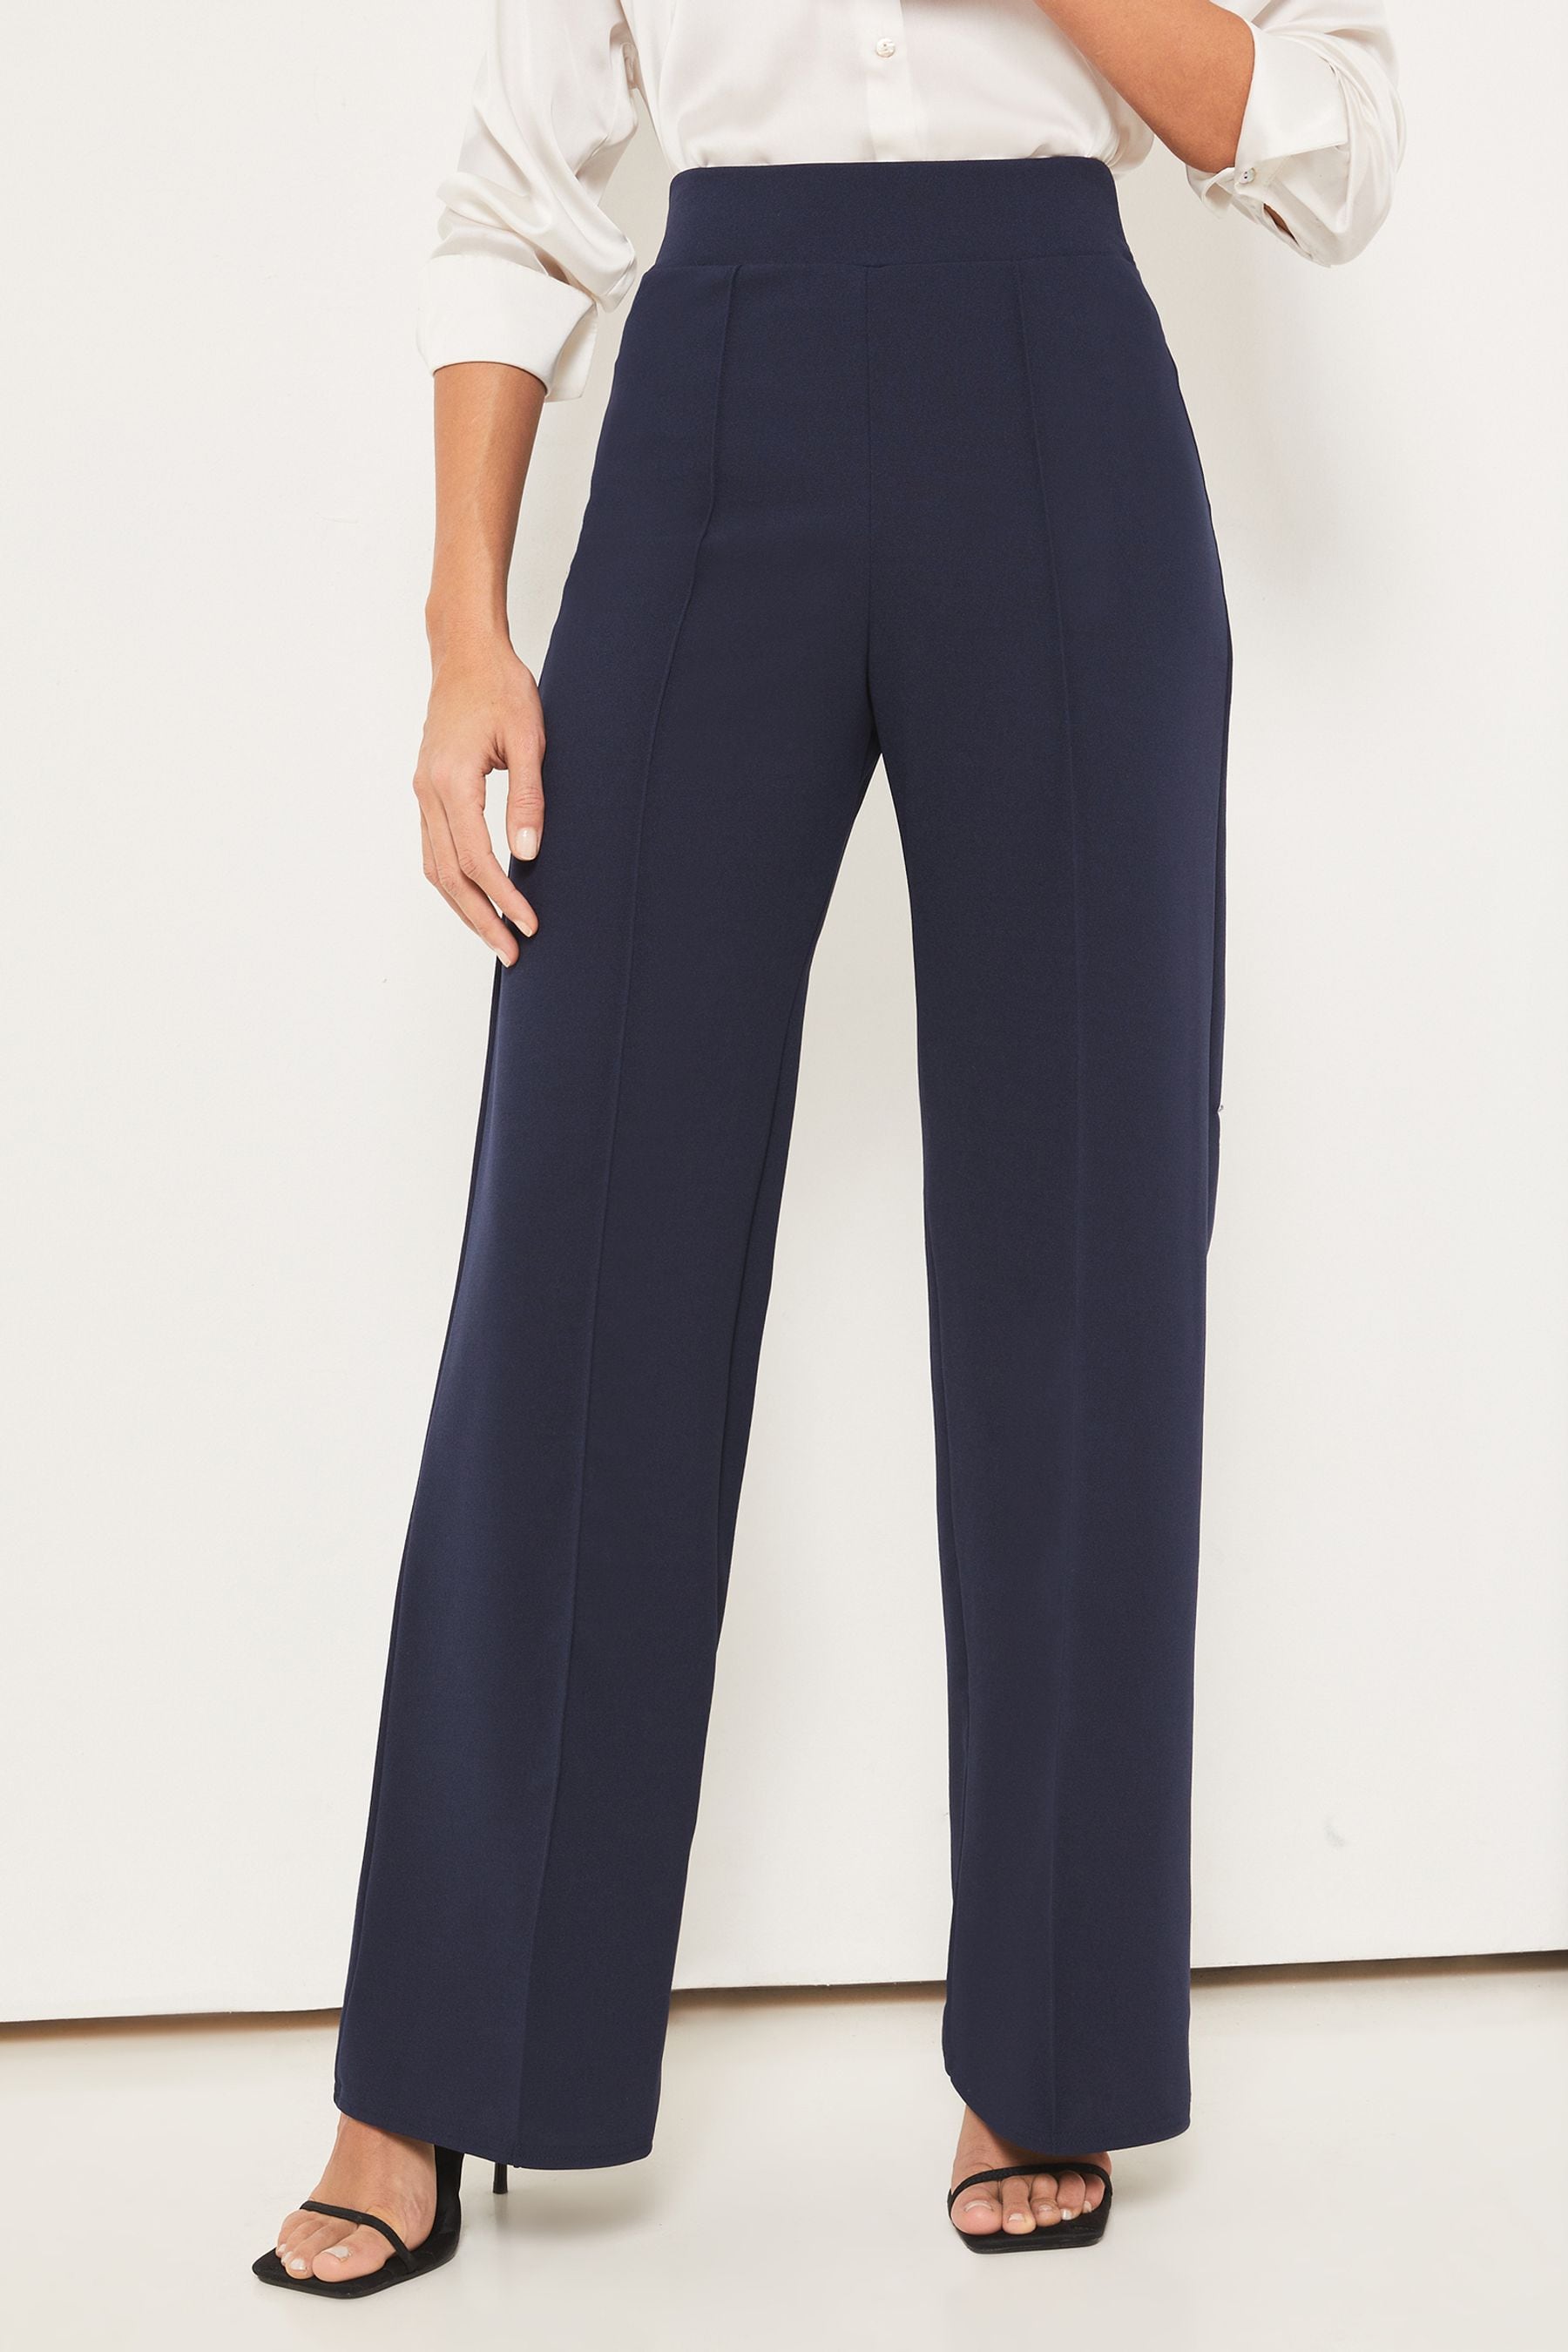 Buy Lipsy High Waist Wide Leg Tailored Trousers from Next Malta